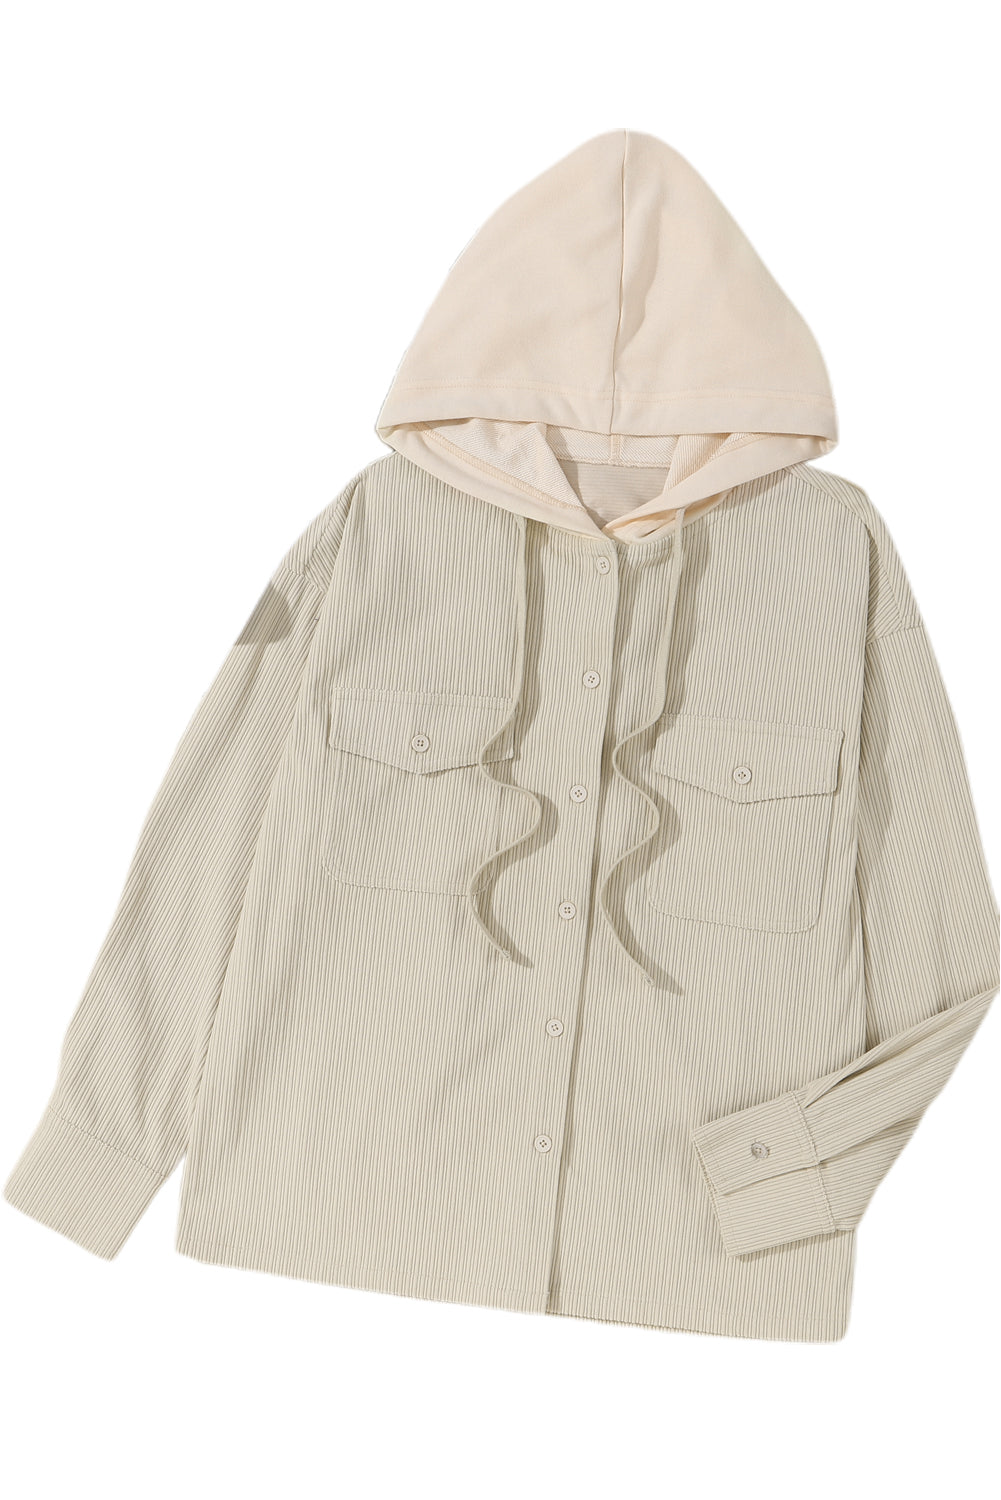 Parchment Drawstring Hooded Corduroy Shacket - Bellisima Clothing Collective